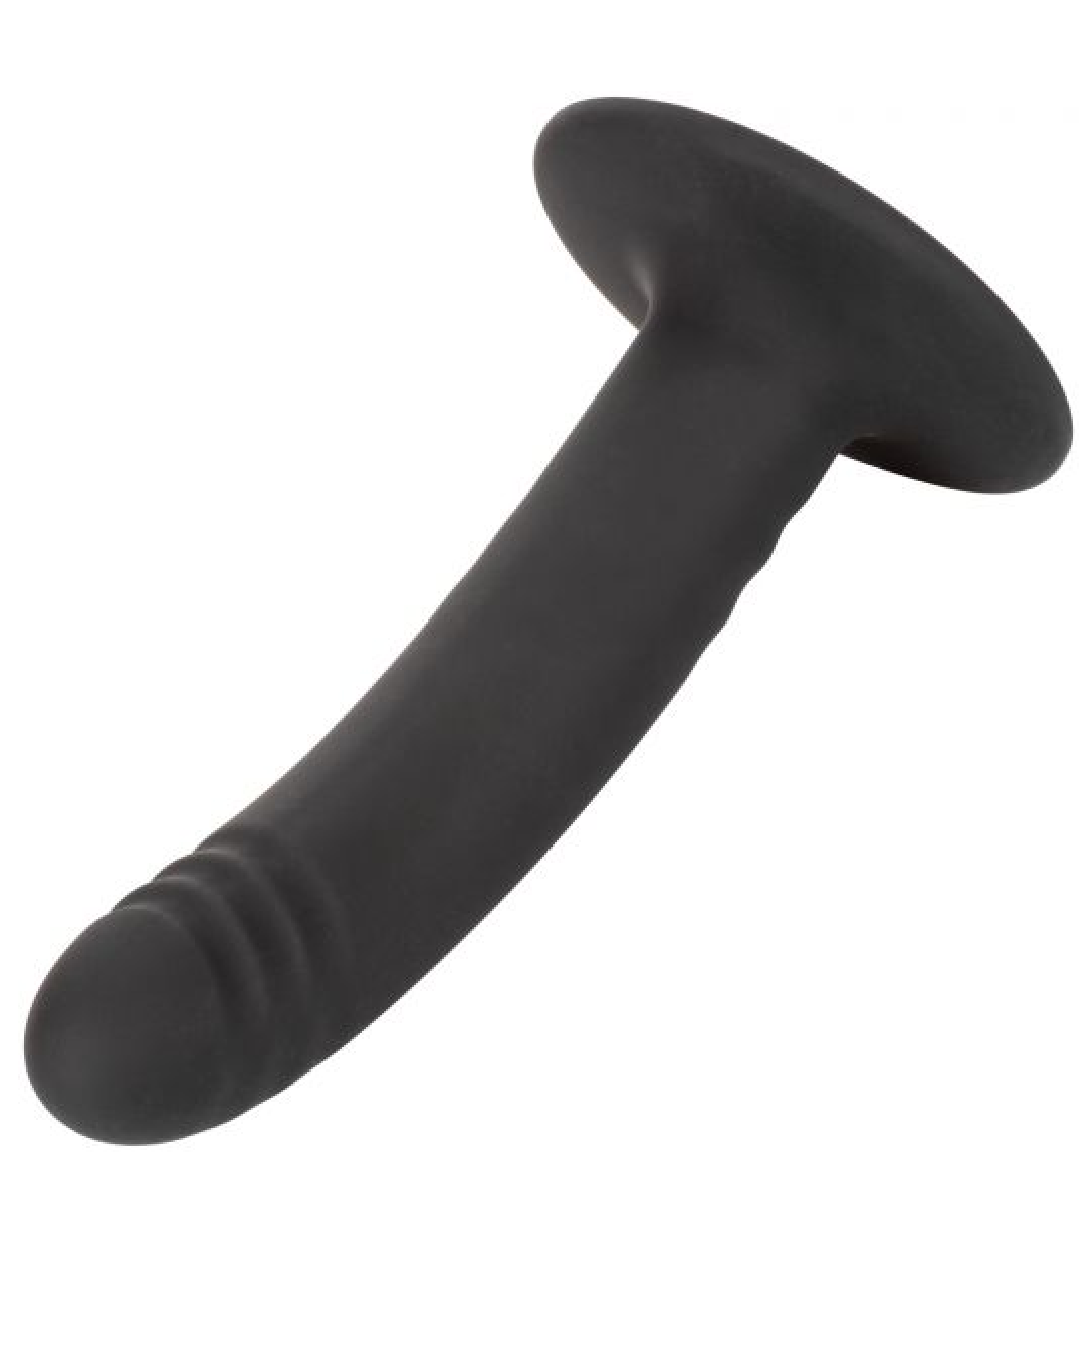 Boundless 6 Inch Ridged Silicone Dildo - Black tilted sideways with a focus on the textured tip